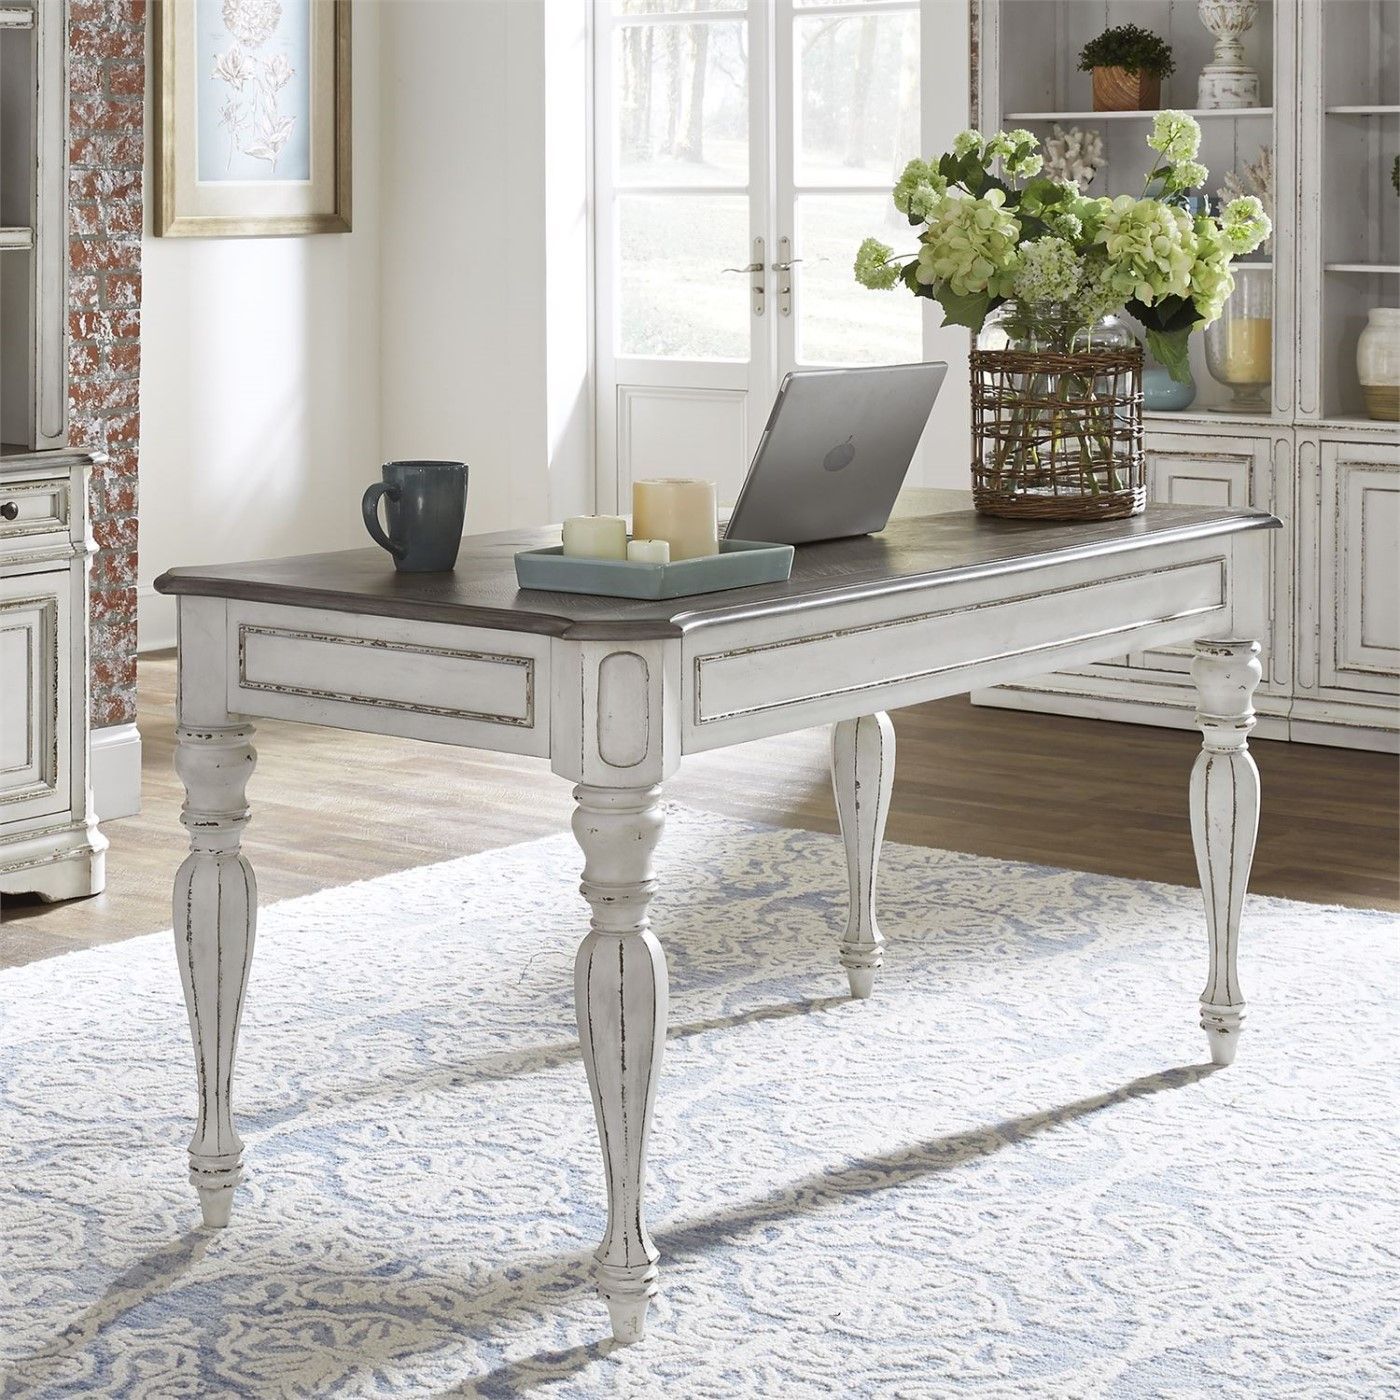 Magnolia Traditional Antique White Writing Desk With Flip Down Keyboard With Regard To White And Cement Writing Desks (View 11 of 15)